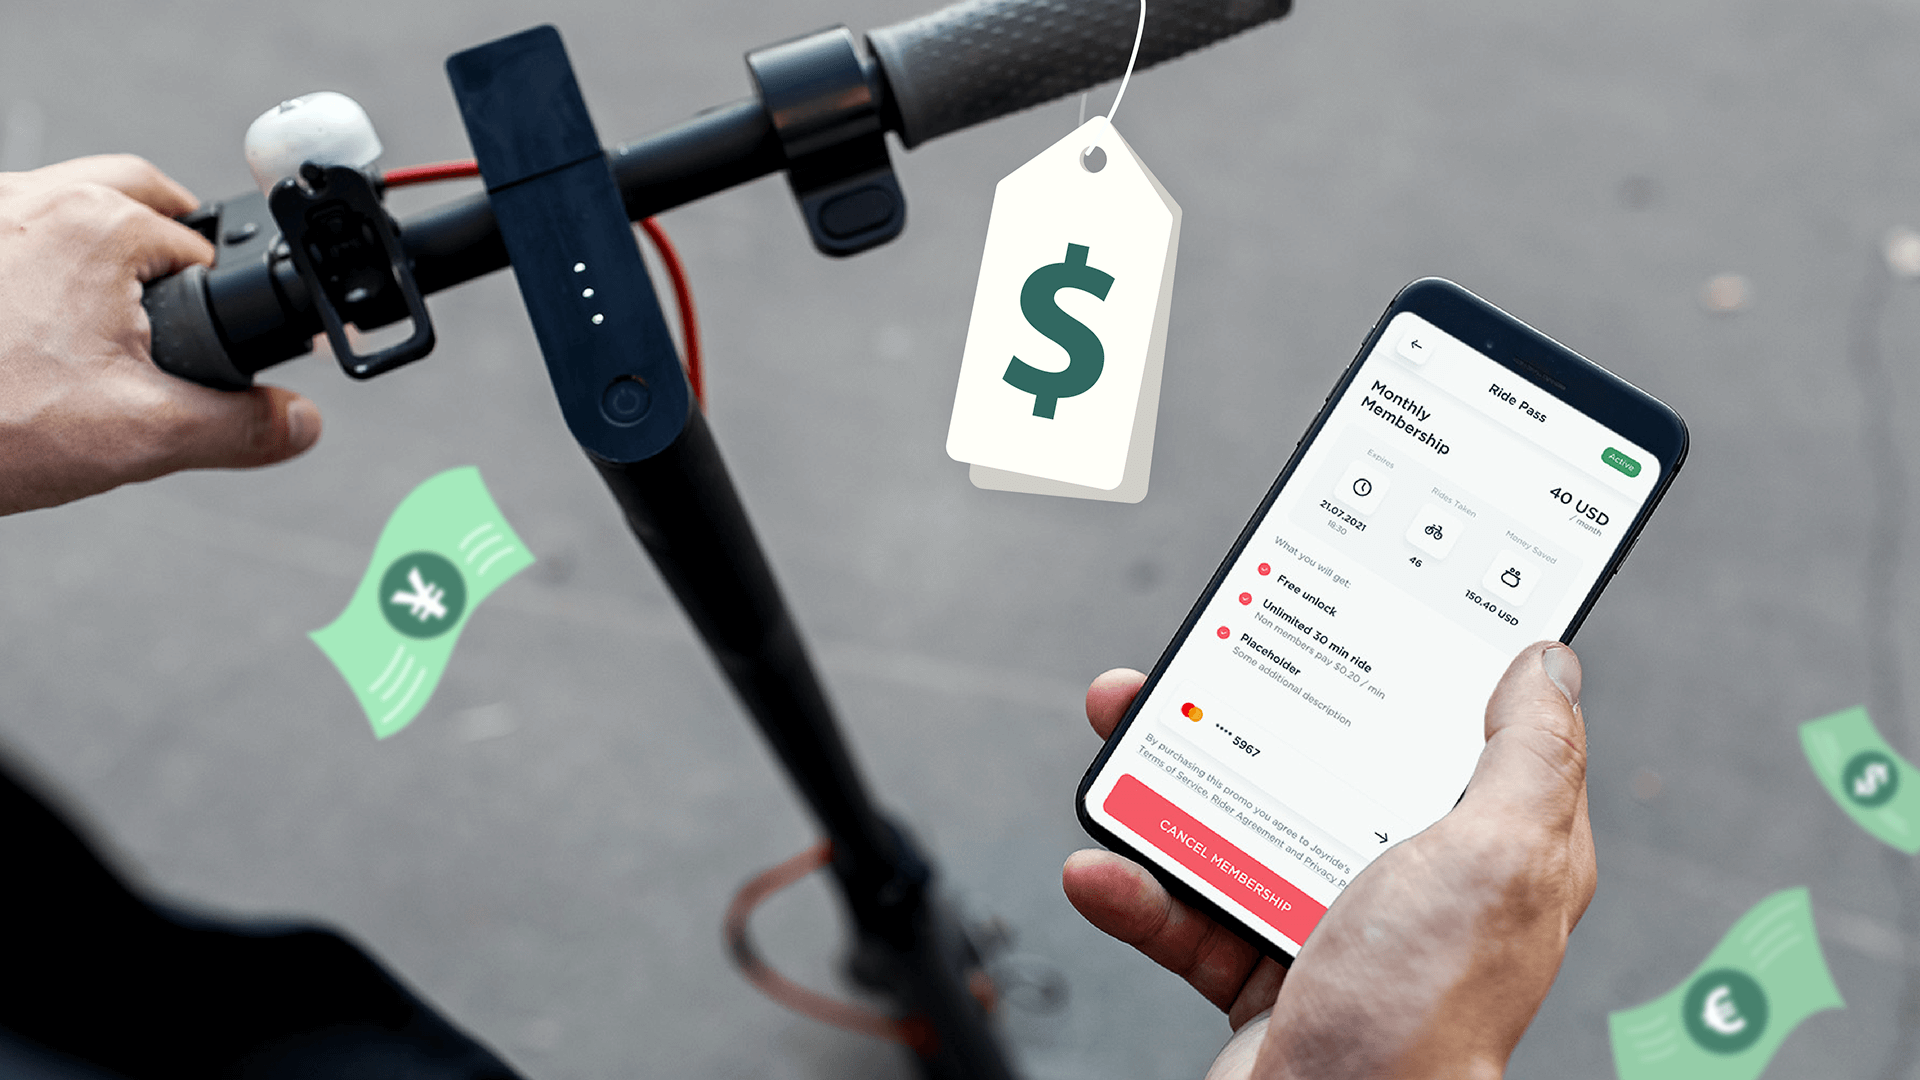 e-scooter with price tag and mobile rider app with illustrations of money micromobility pricing